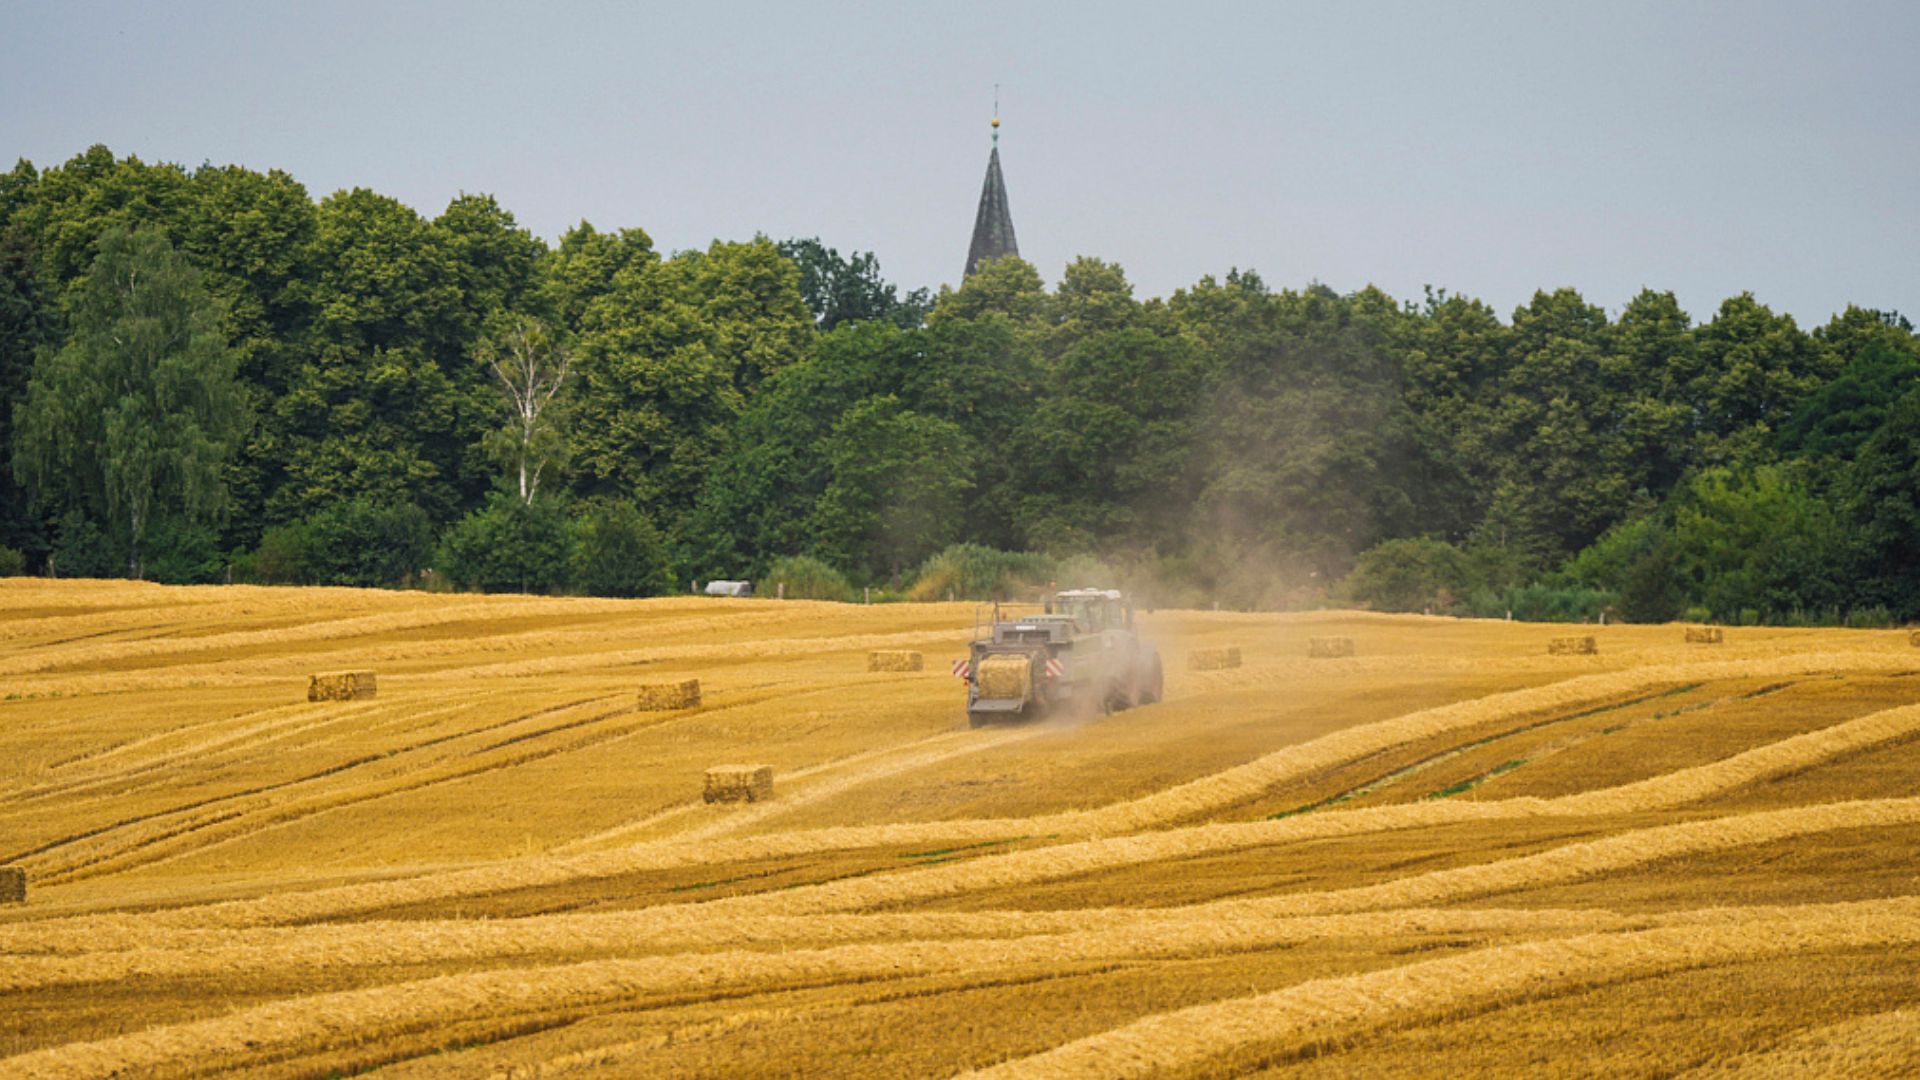 The issue of Ukrainian grain imports has caused a strain with farmers in various European countries. /Soeren Stache/picture-alliance/dpa/AP Images